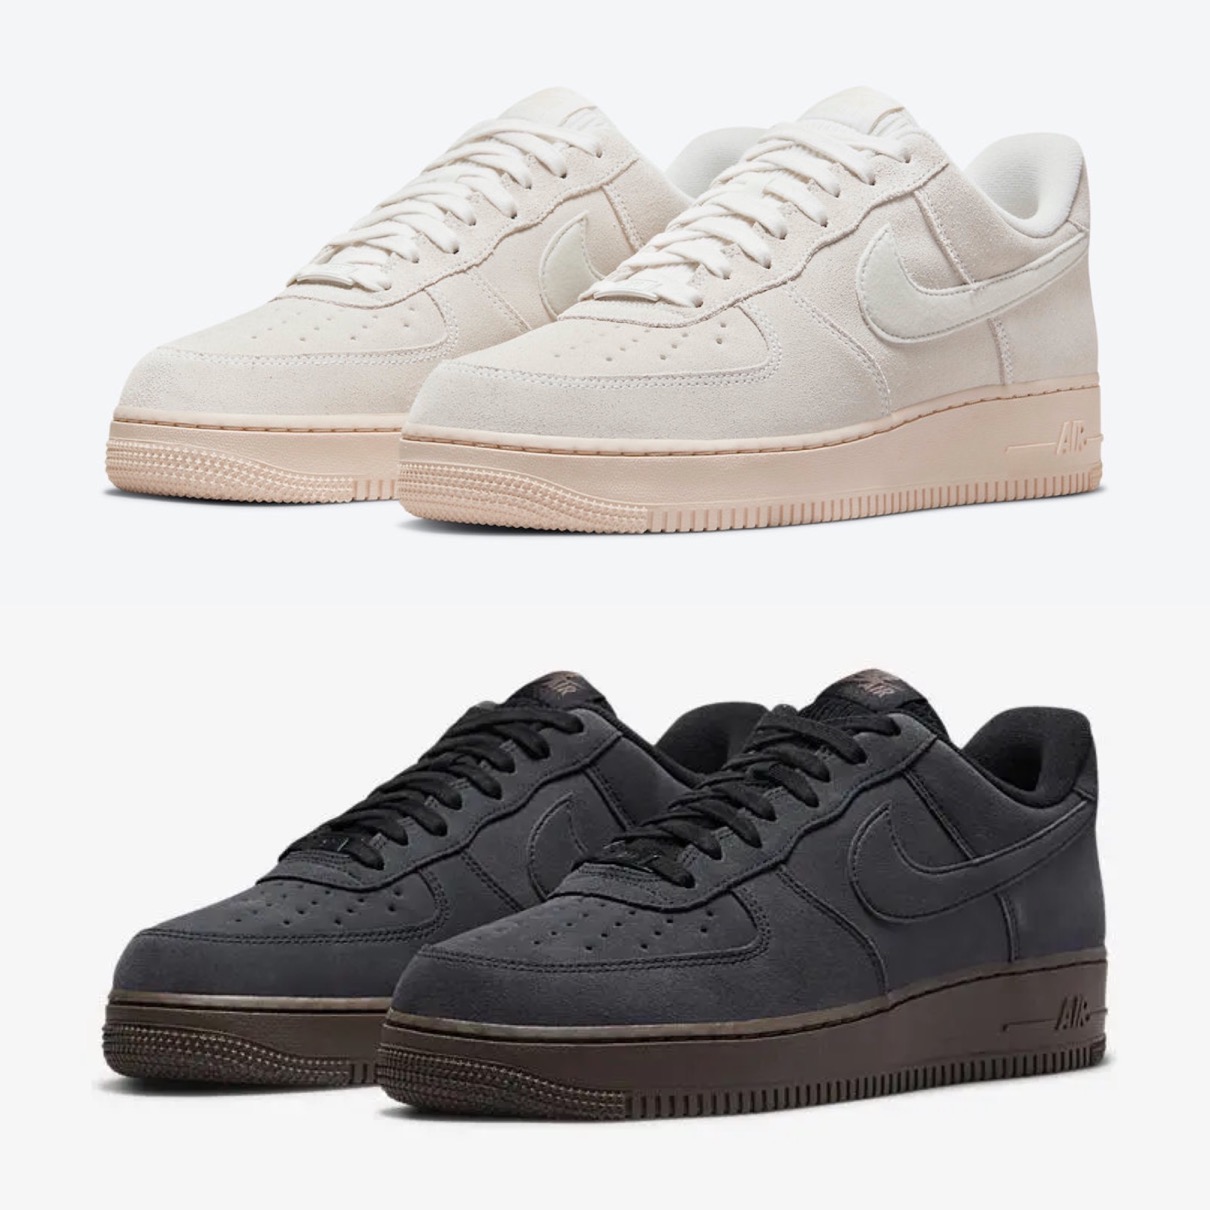 Nike】Air Force 1 Low Suede Pack “Off Noir” & “Summit White”が2021 ...